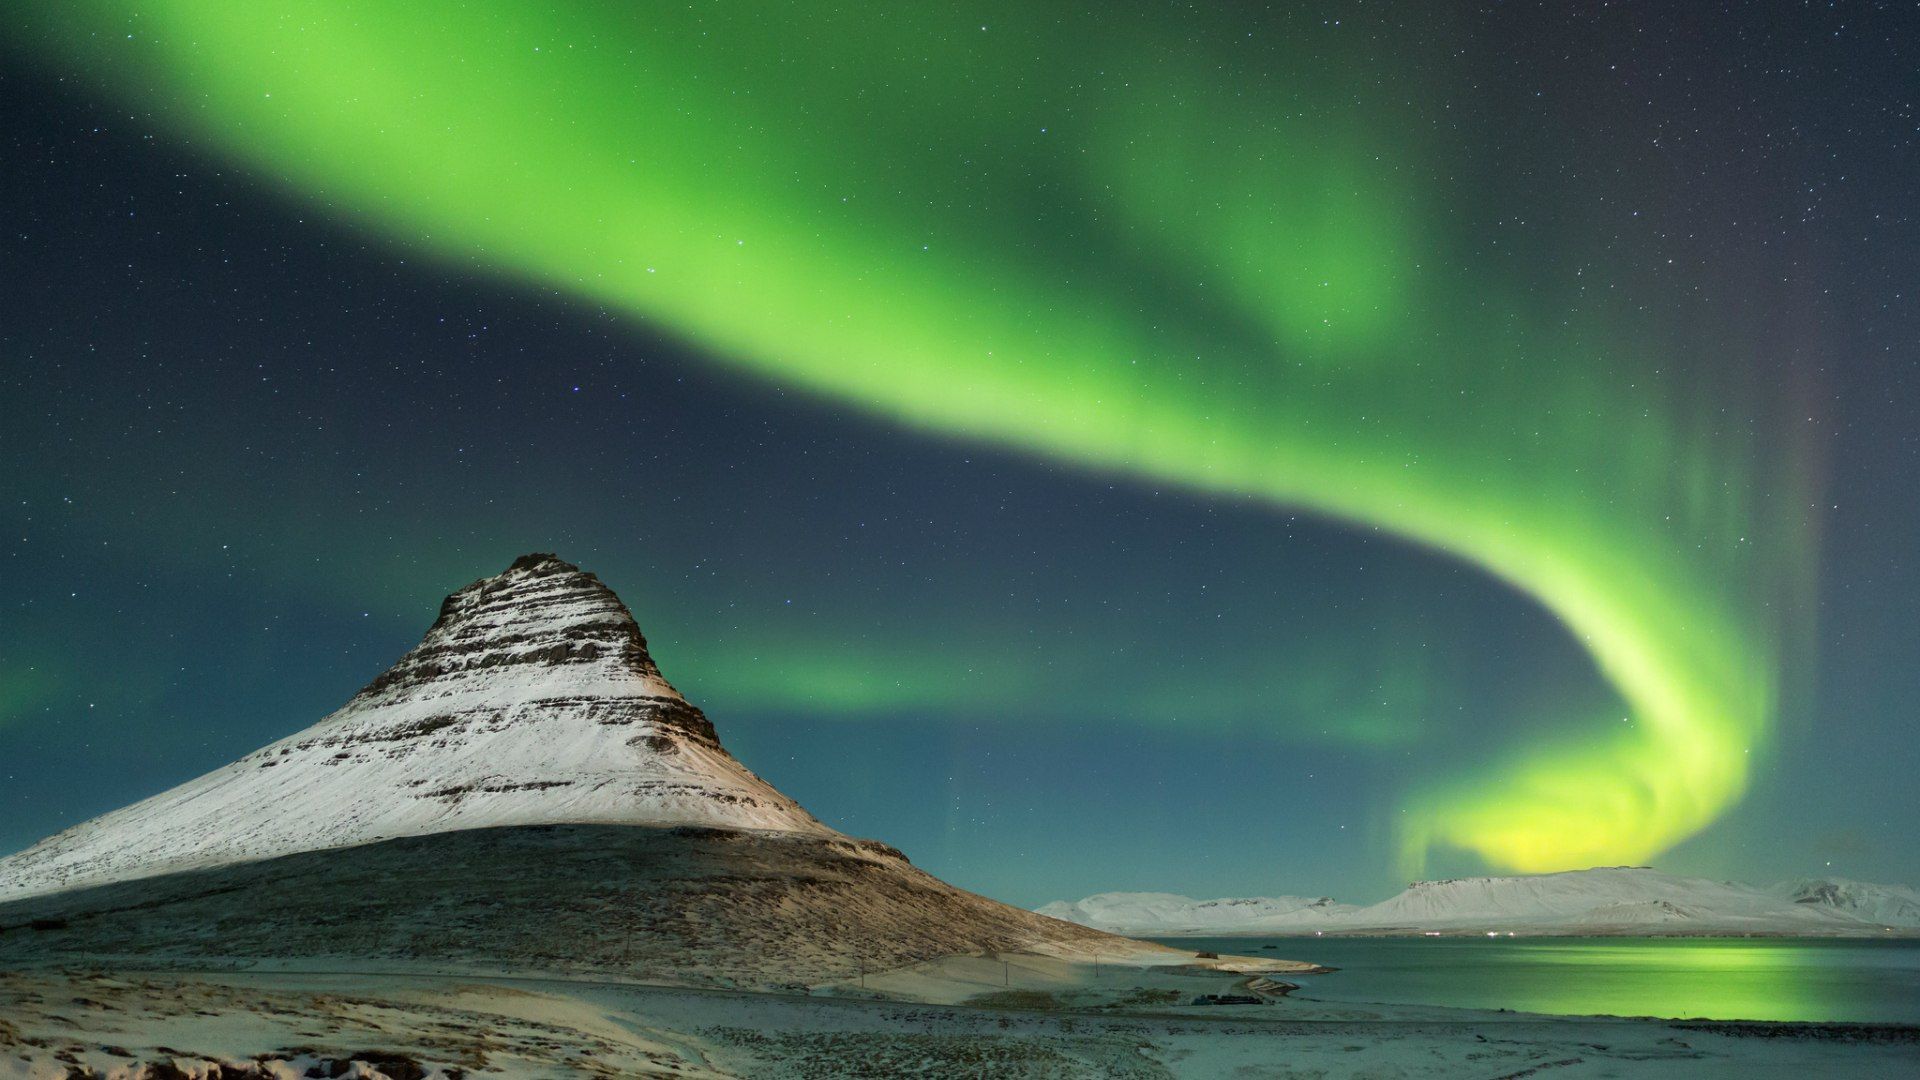 Northern Lights in Iceland wallpapers and images - wallpapers ...